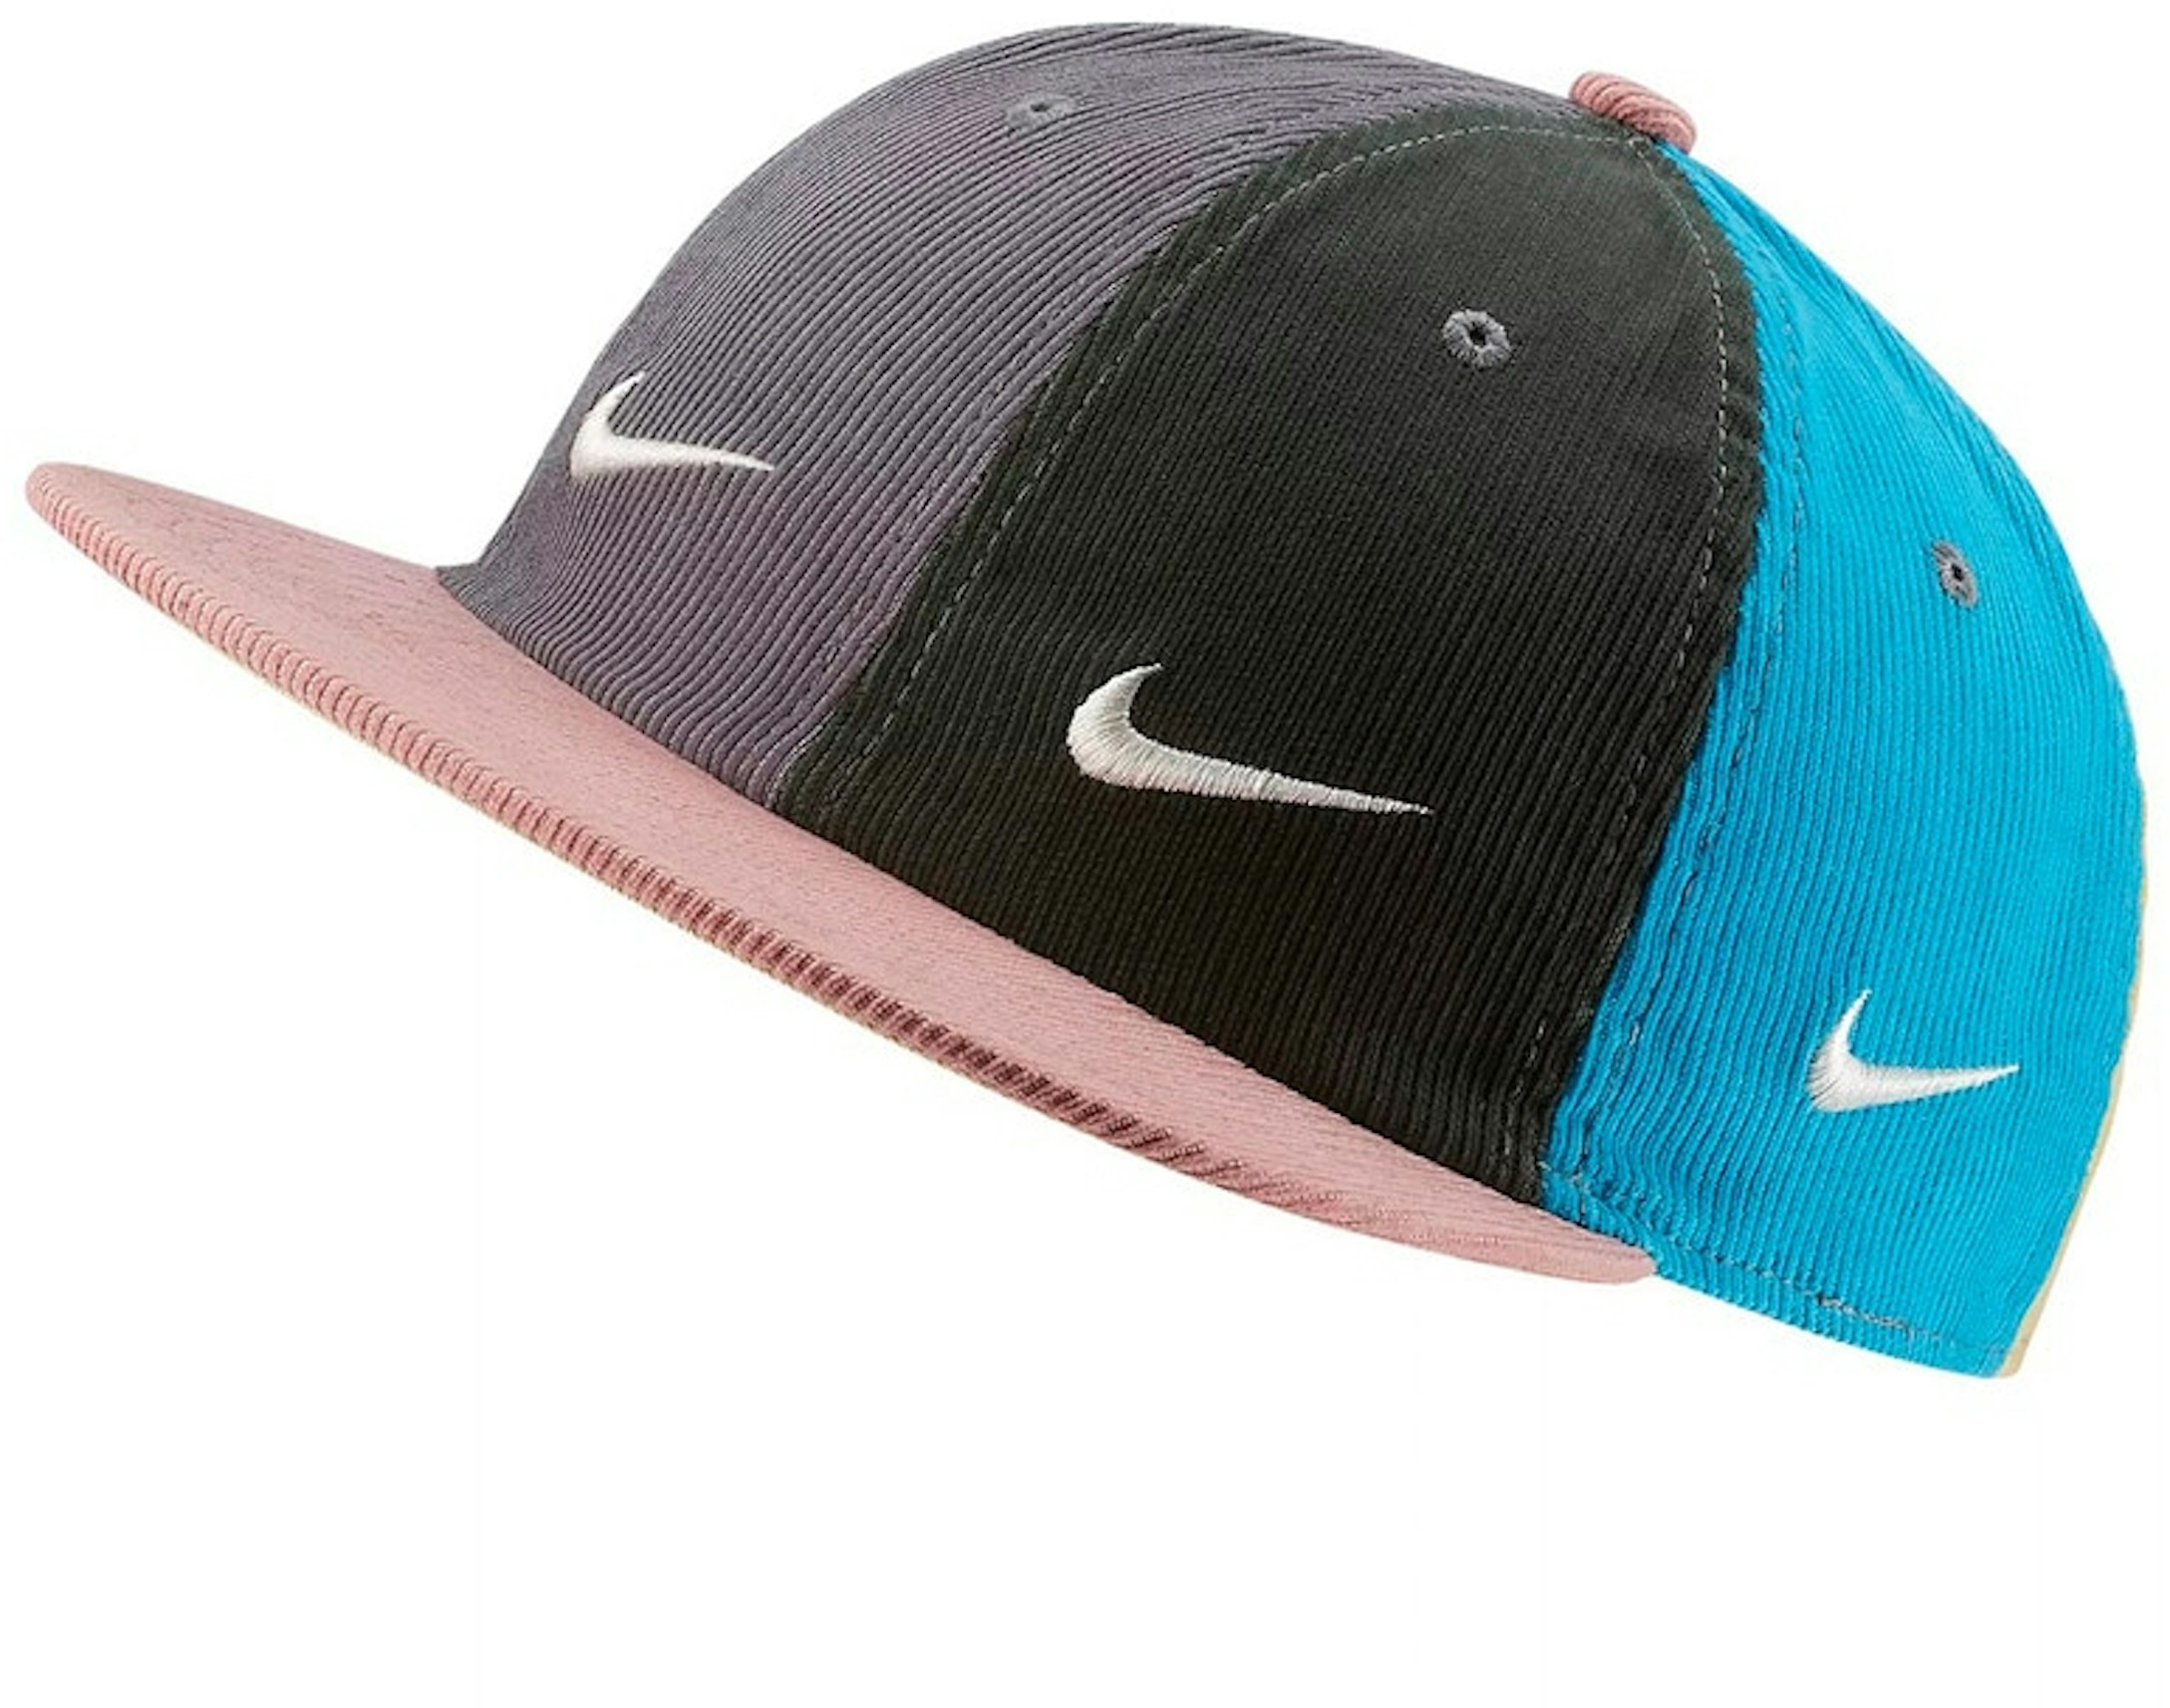 jacht blootstelling isolatie Nike Sean Wotherspoon Heritage '86 Quickstrike Cap Multicolor - SS18 Men's  - US